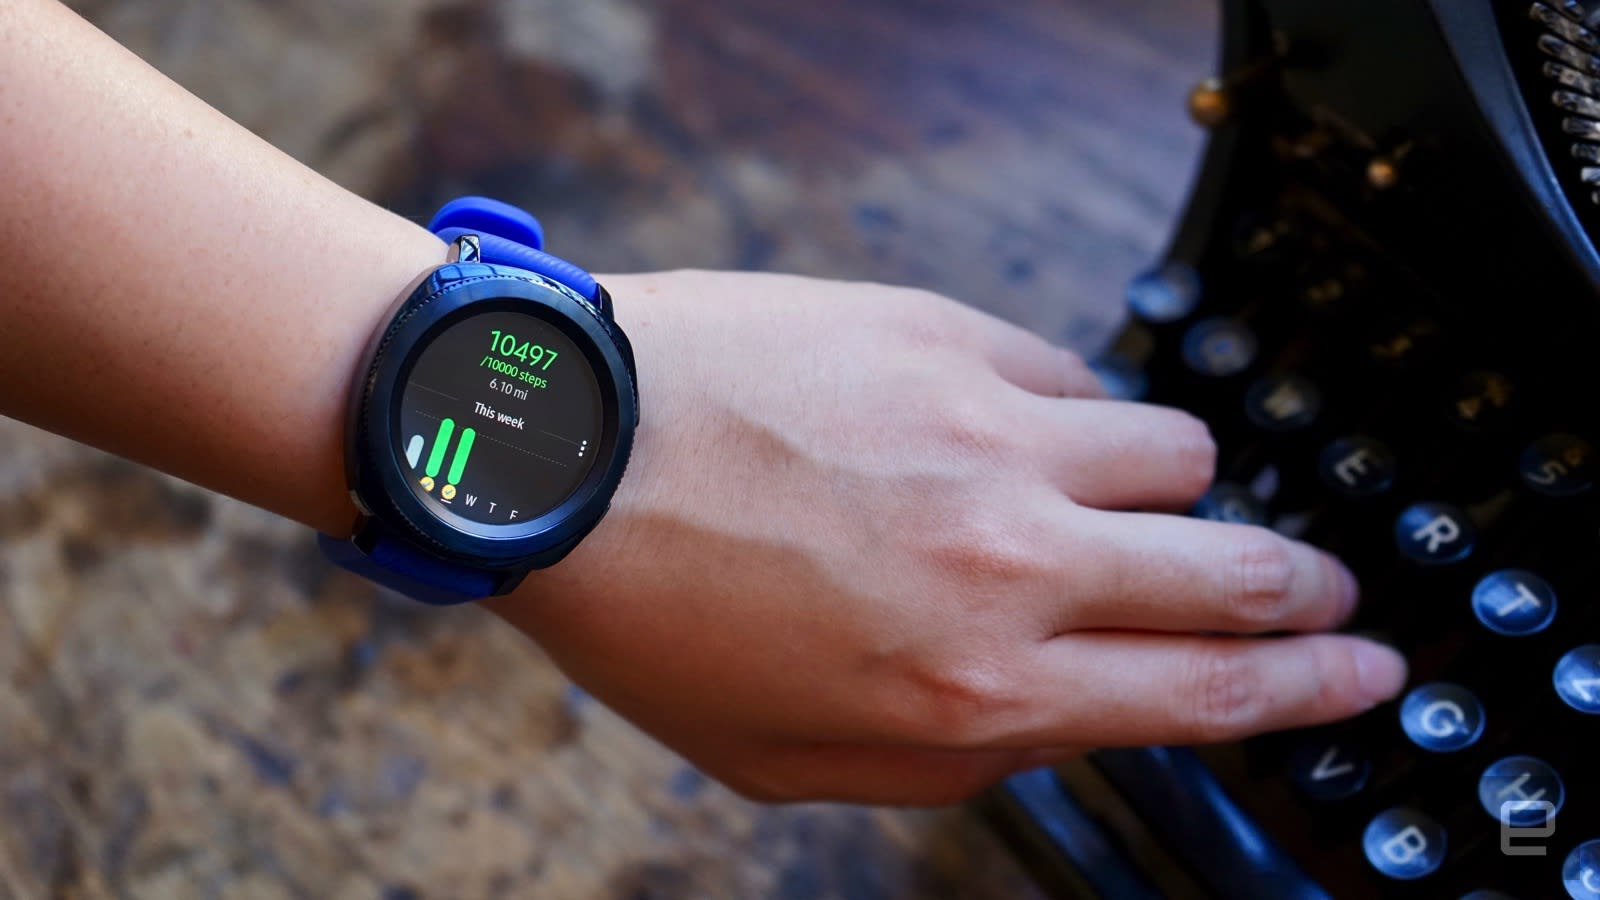 Vurdering udtryk Ritual Samsung Gear Sport hands-on: Promising but incomplete | Engadget